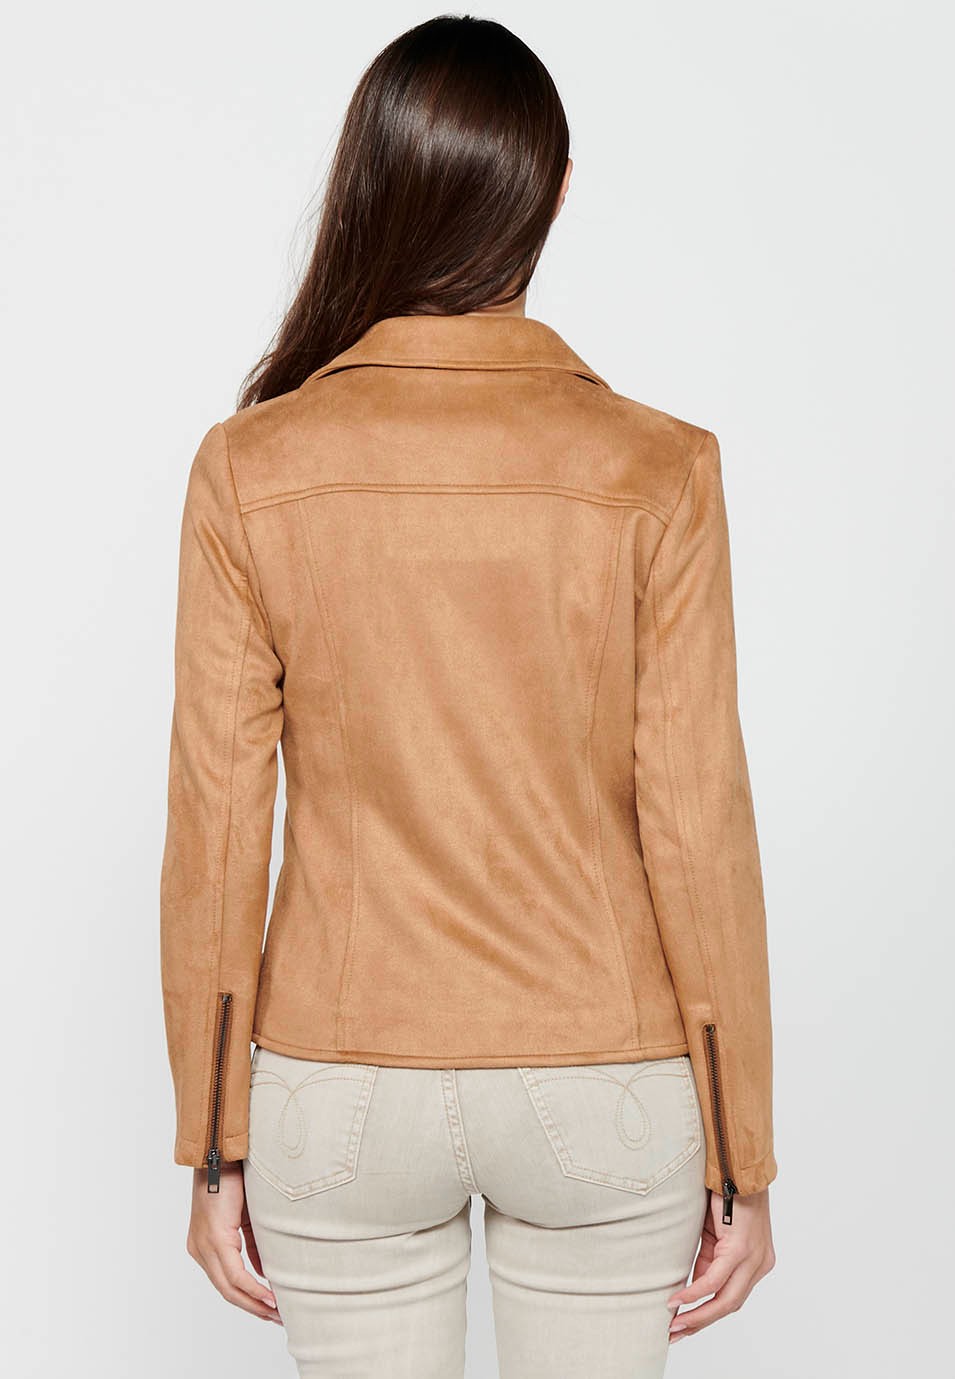 Camel Color Long Sleeve Jacket with Cross-Zip Closure with Lapel Collar and Pockets for Women 2